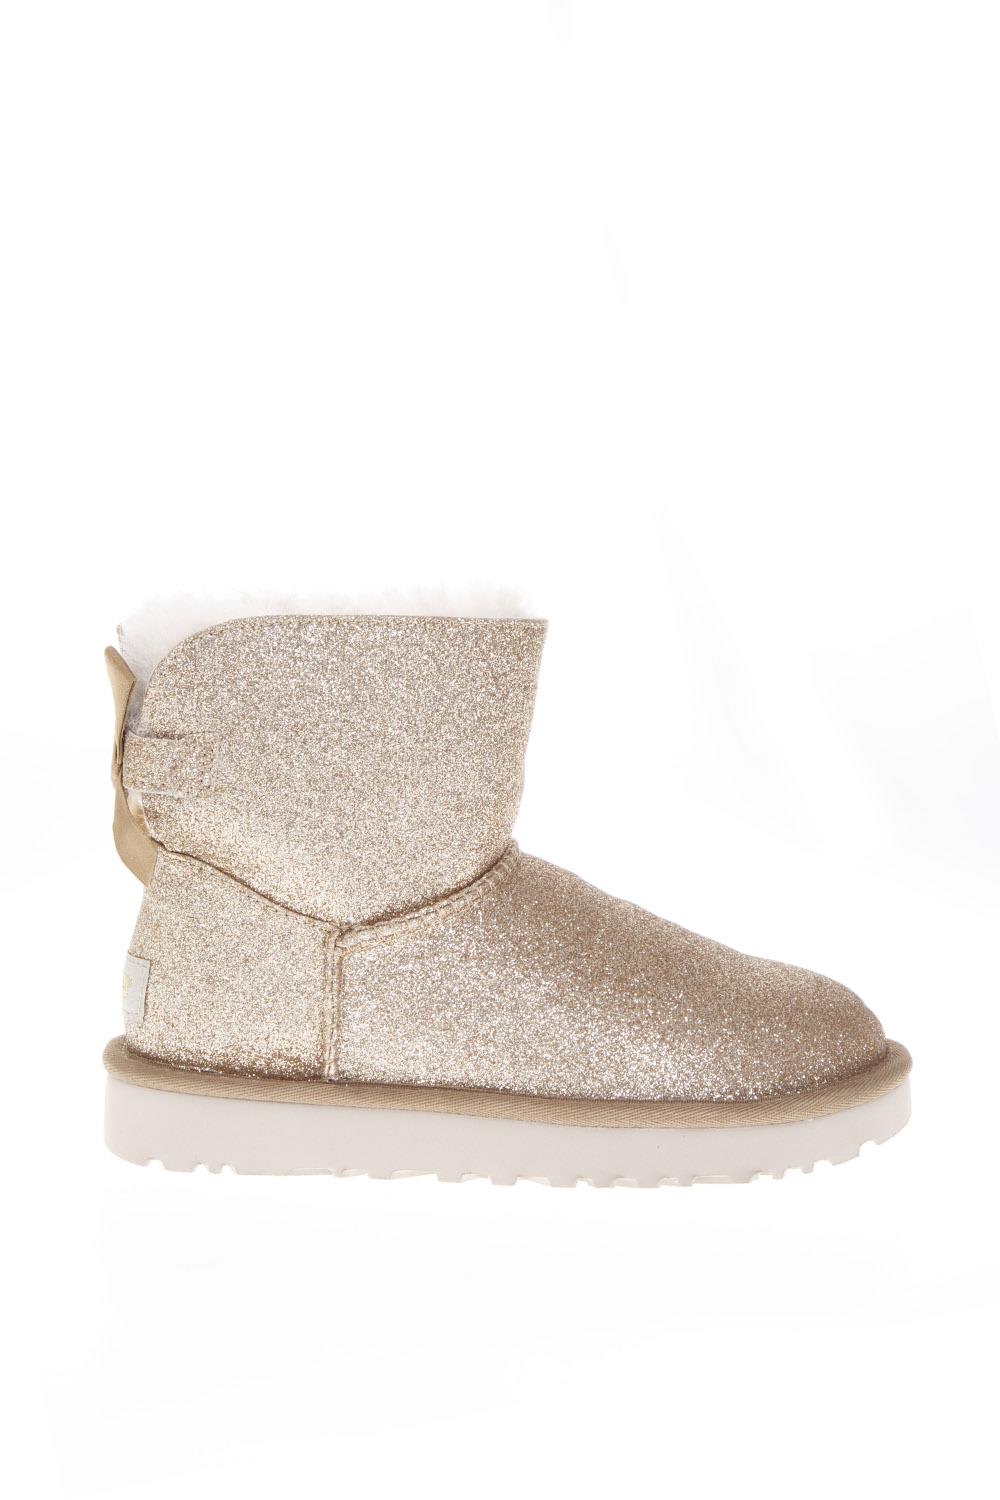 UGG Gold Sheep Leather Mini Bailey Sparkle Boots